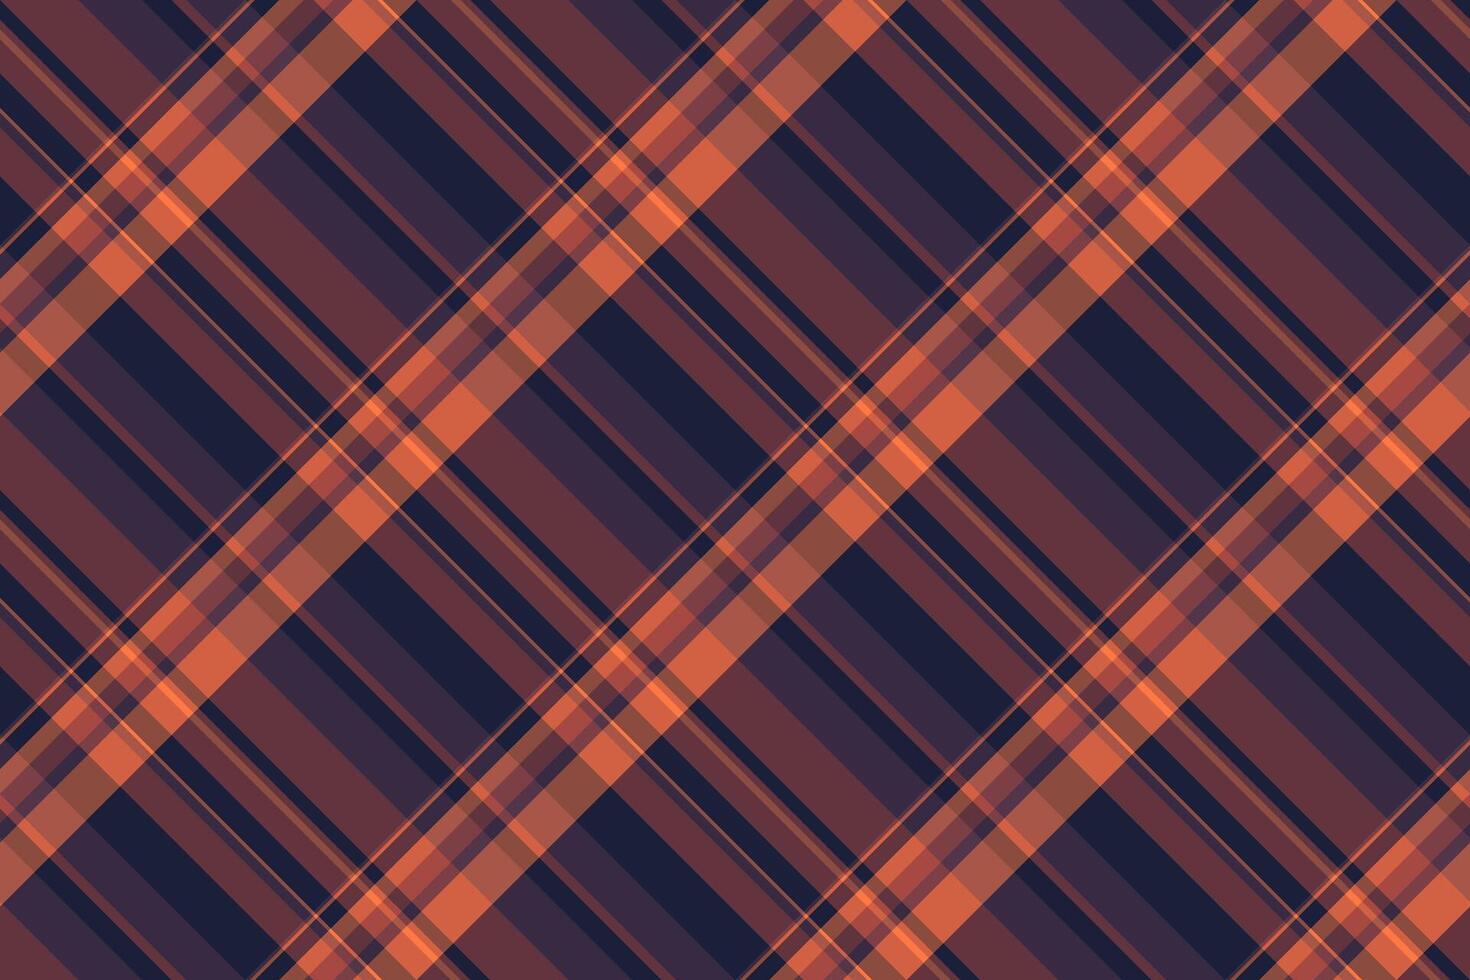 Fabric tartan plaid of pattern background vector with a seamless check texture textile.